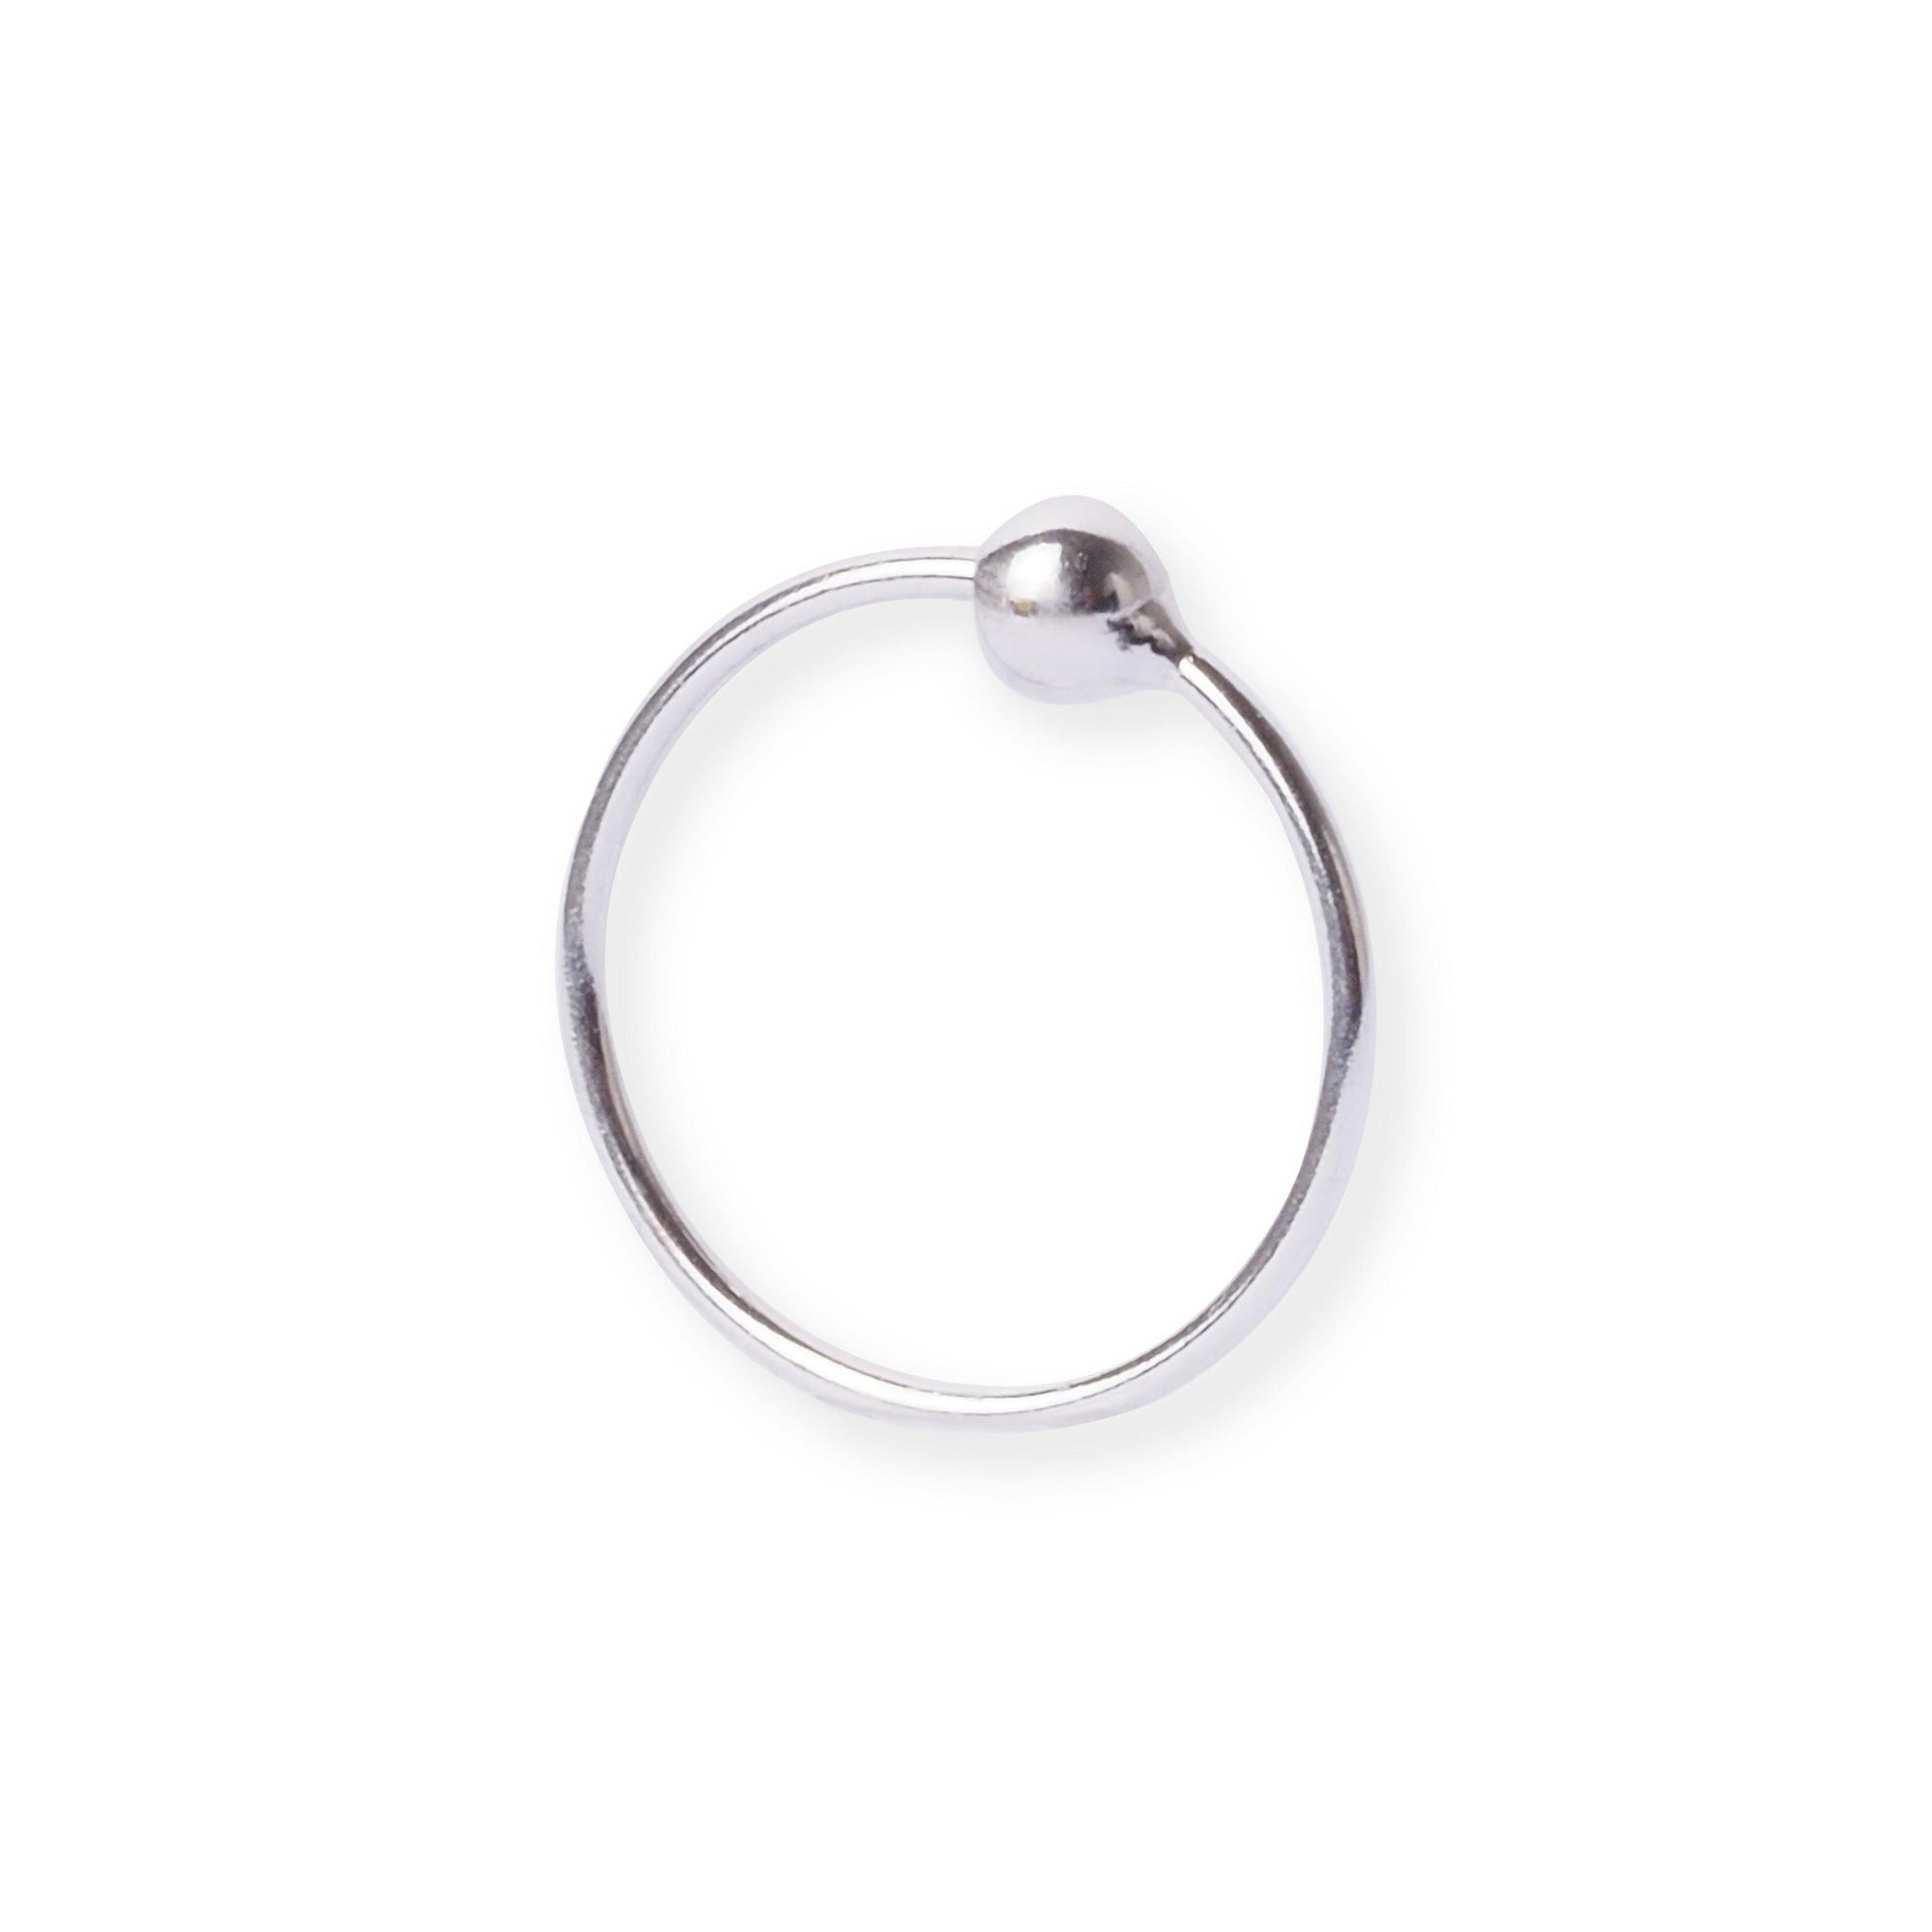 18ct Gold Rhodium Plated Nose Ring with Plain Finish and Ball Closure NR-7578R - Minar Jewellers